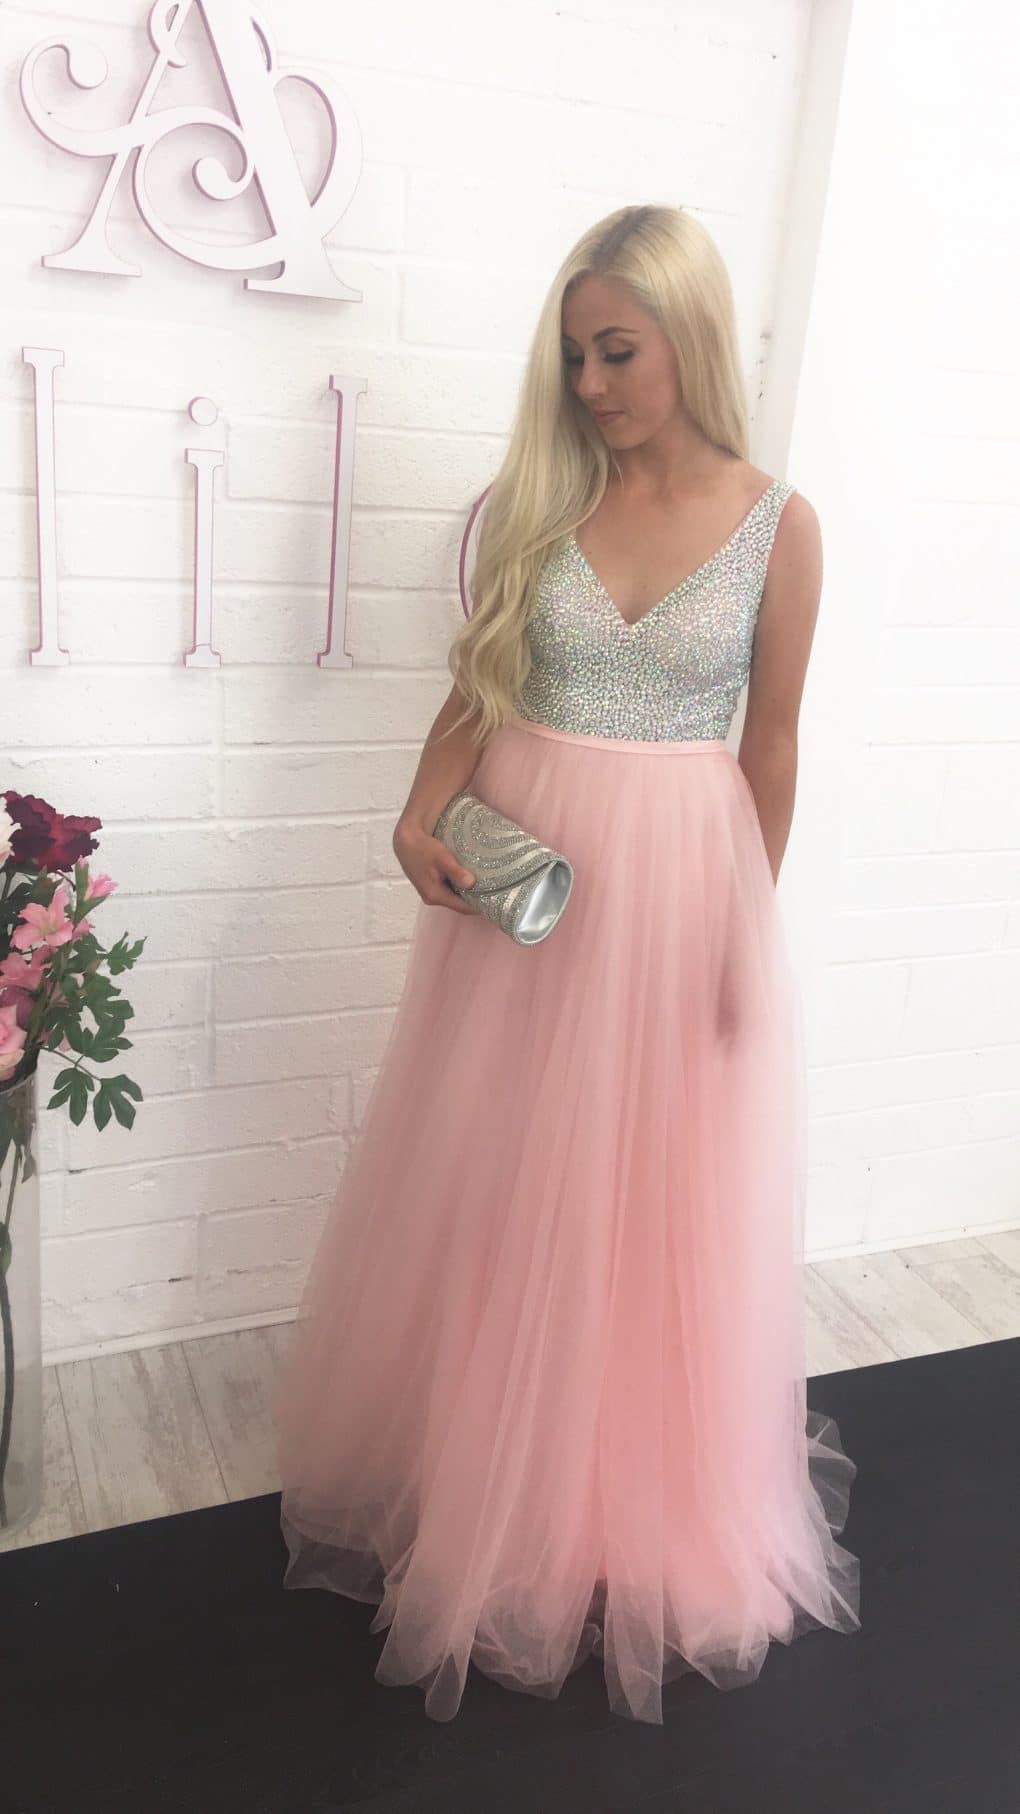 Gino-Cerruti-Pink-Princess-Gown-AnnMaire-2